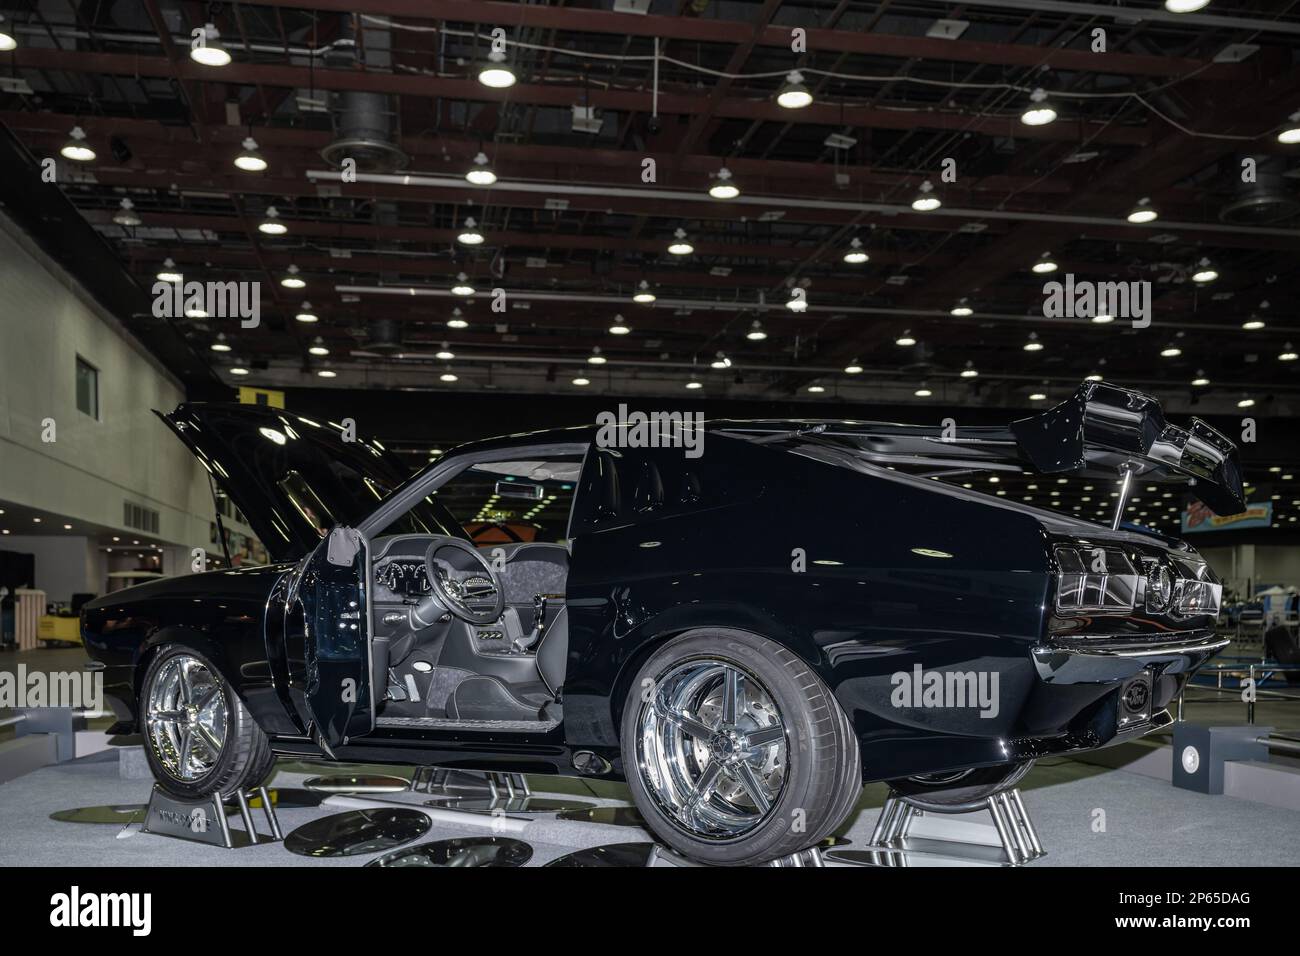 DETROIT, MI/USA - February 24, 2023: A 1978 Ford Mustang II interpretation, 'Great 8' finalist and Ridler trophy contender, at Detroit AutoRama. Stock Photo